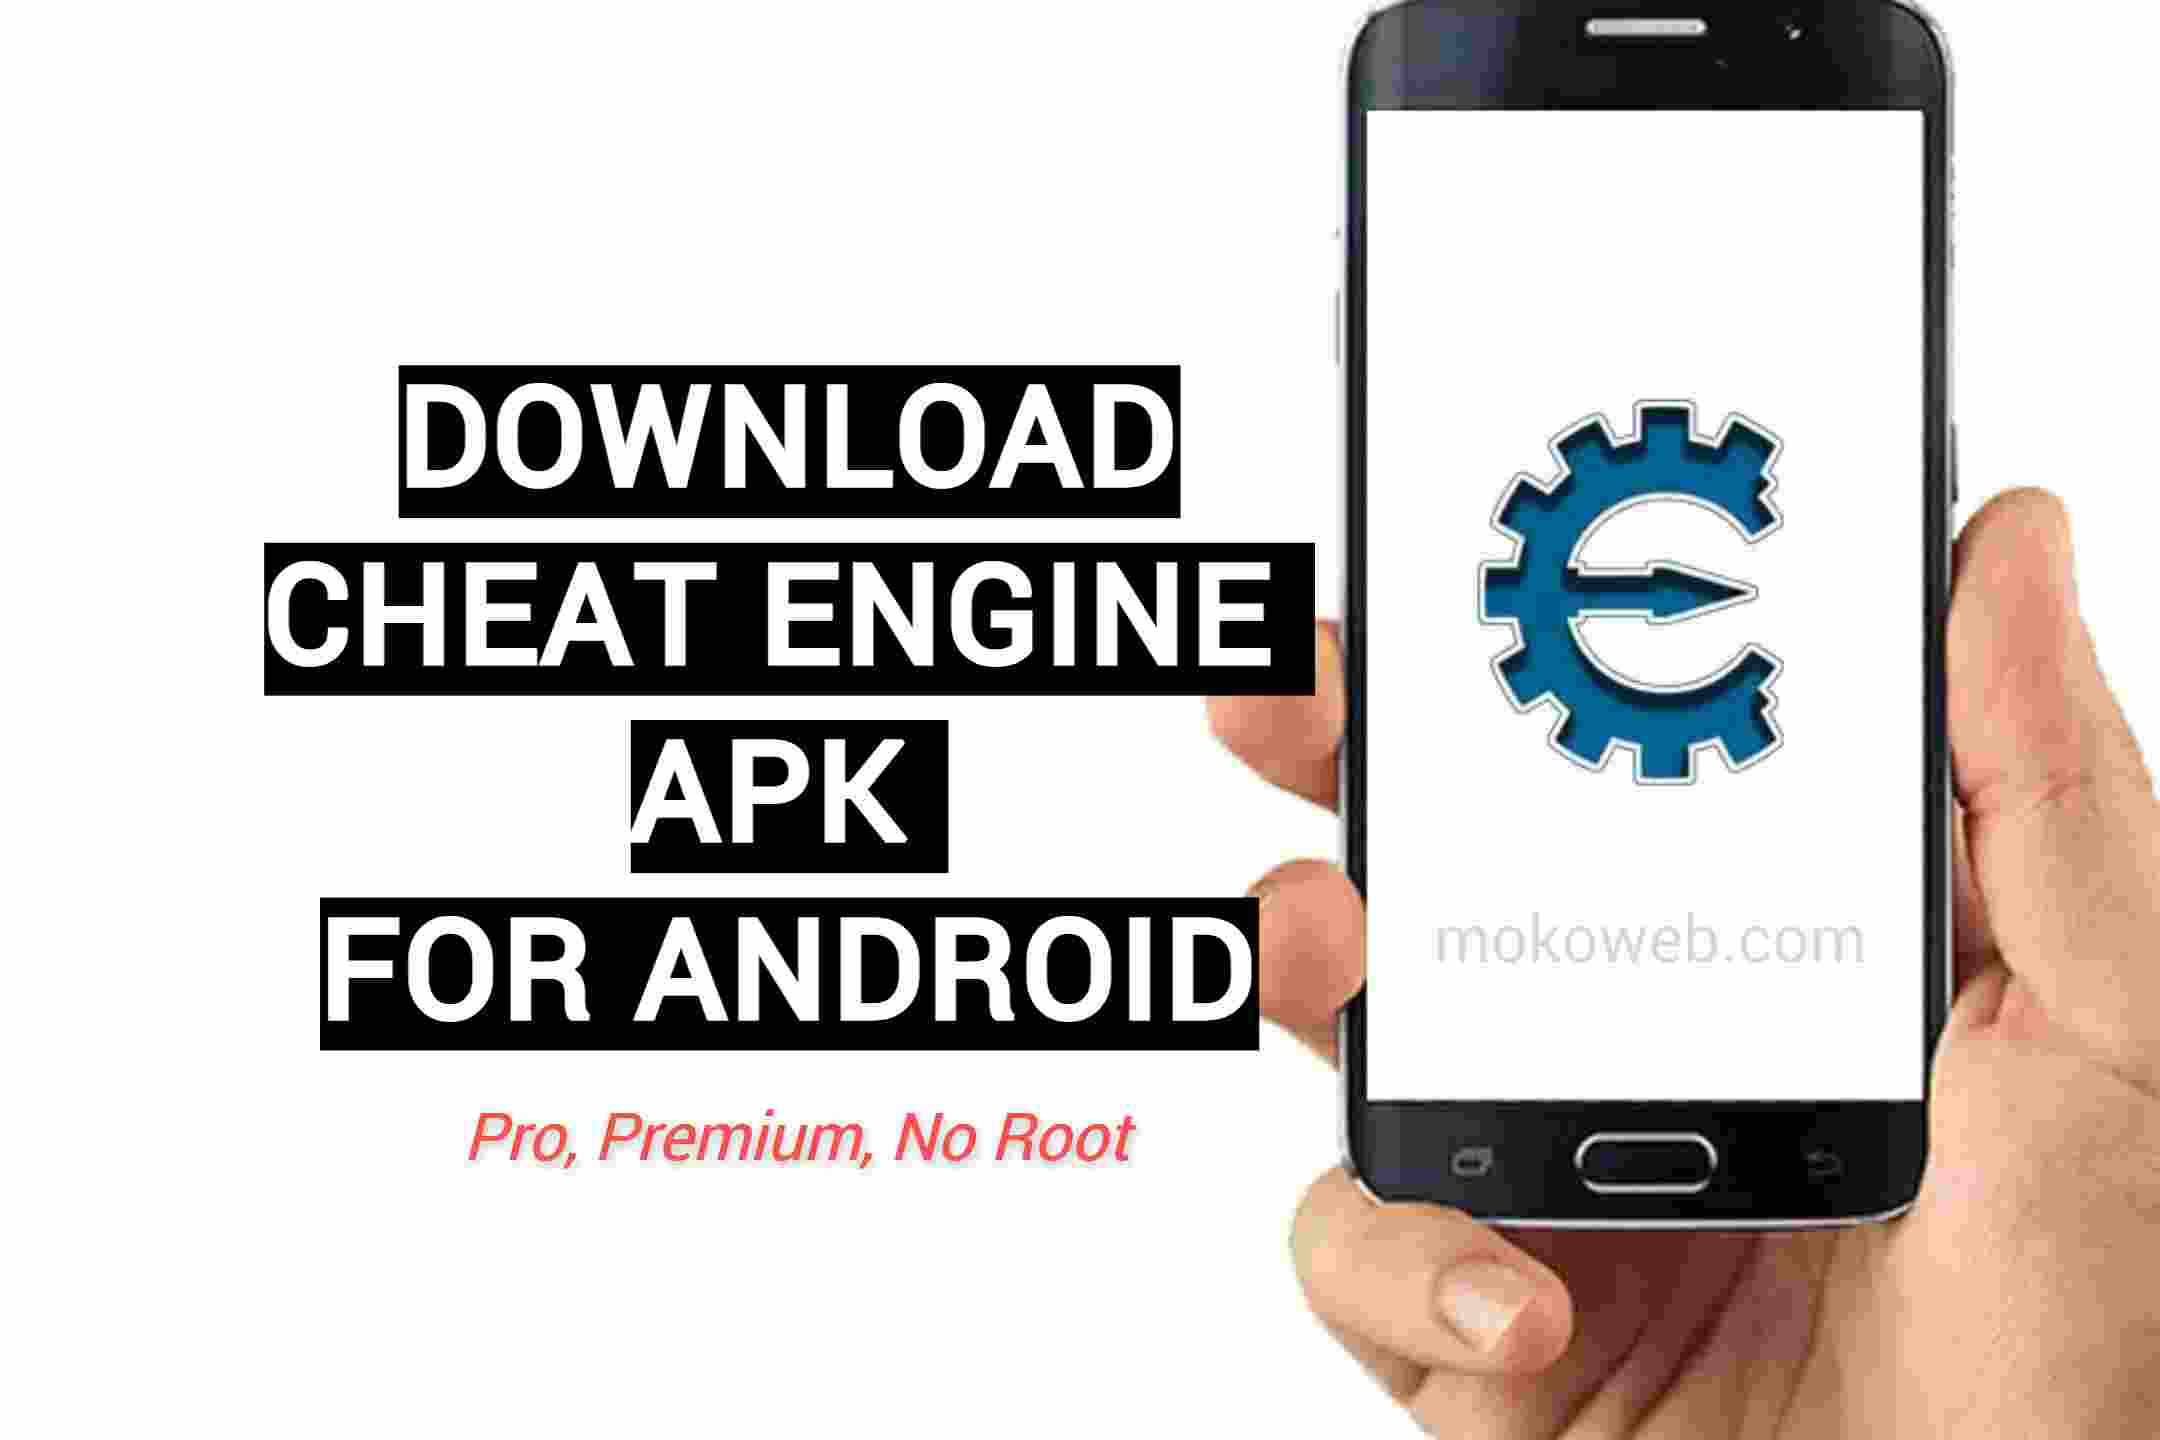 Download Cheat Engine Apk for Android (LATEST Premium, Pro)